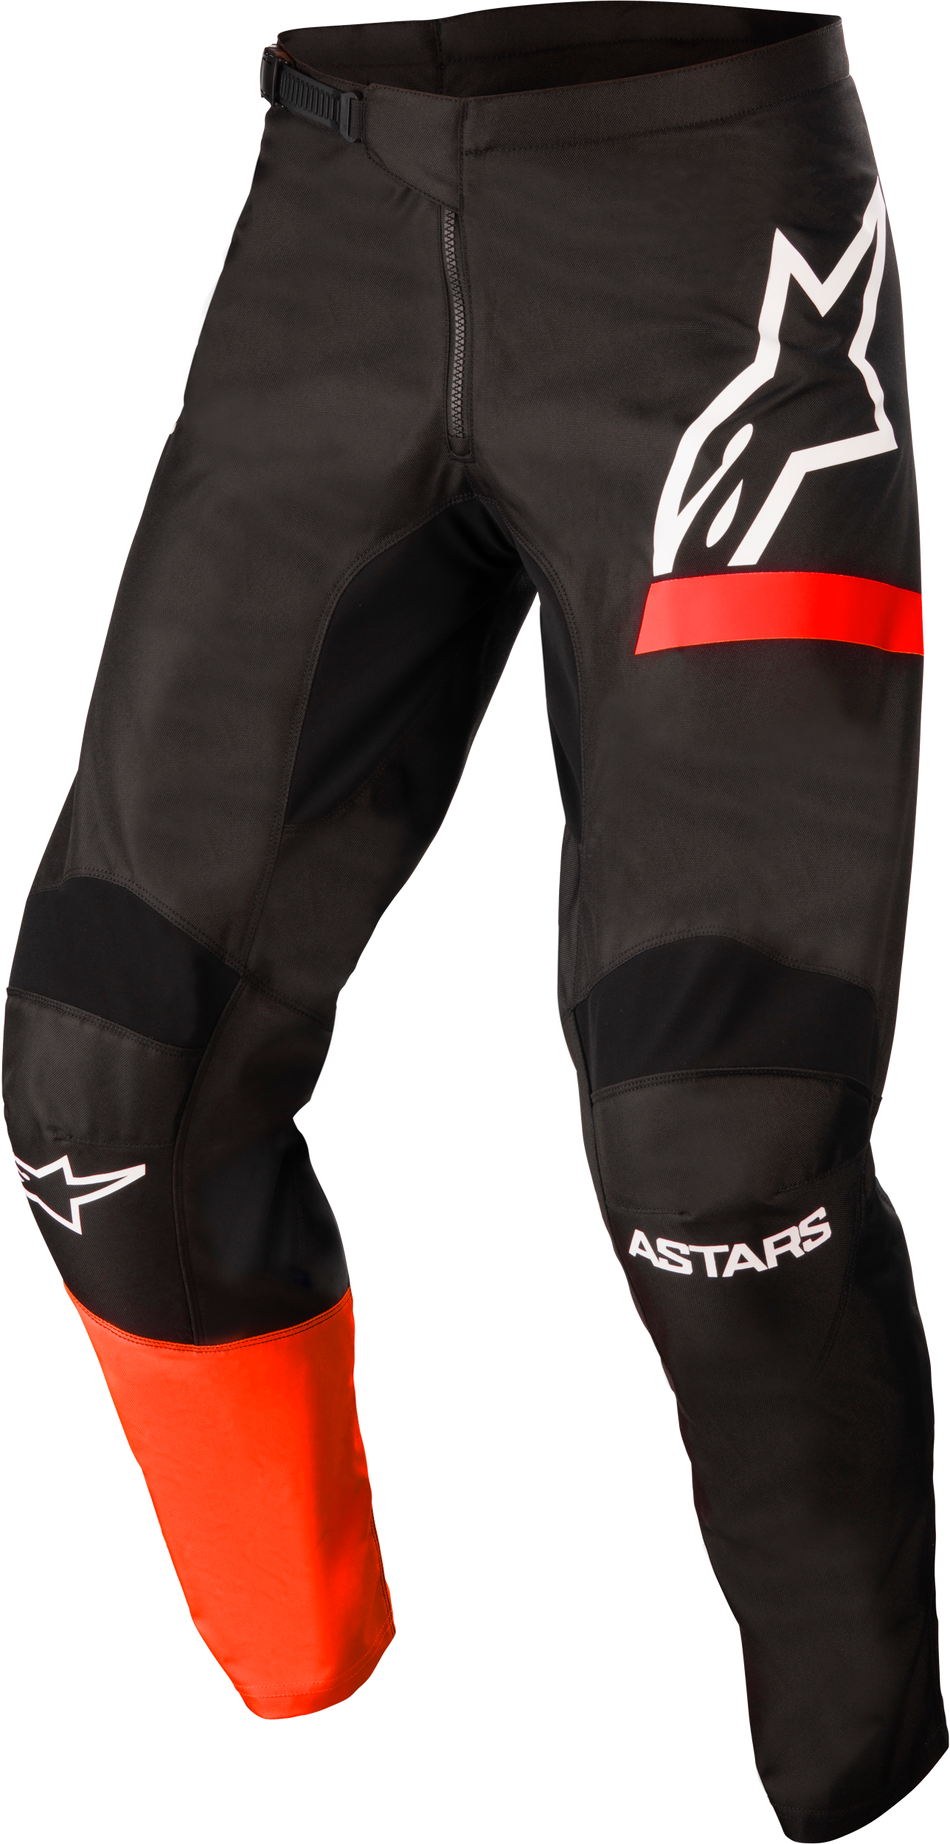 ALPINESTARS Youth Racer Chaser Pants Black/Bright Red Sz 24 3742422-1303-24